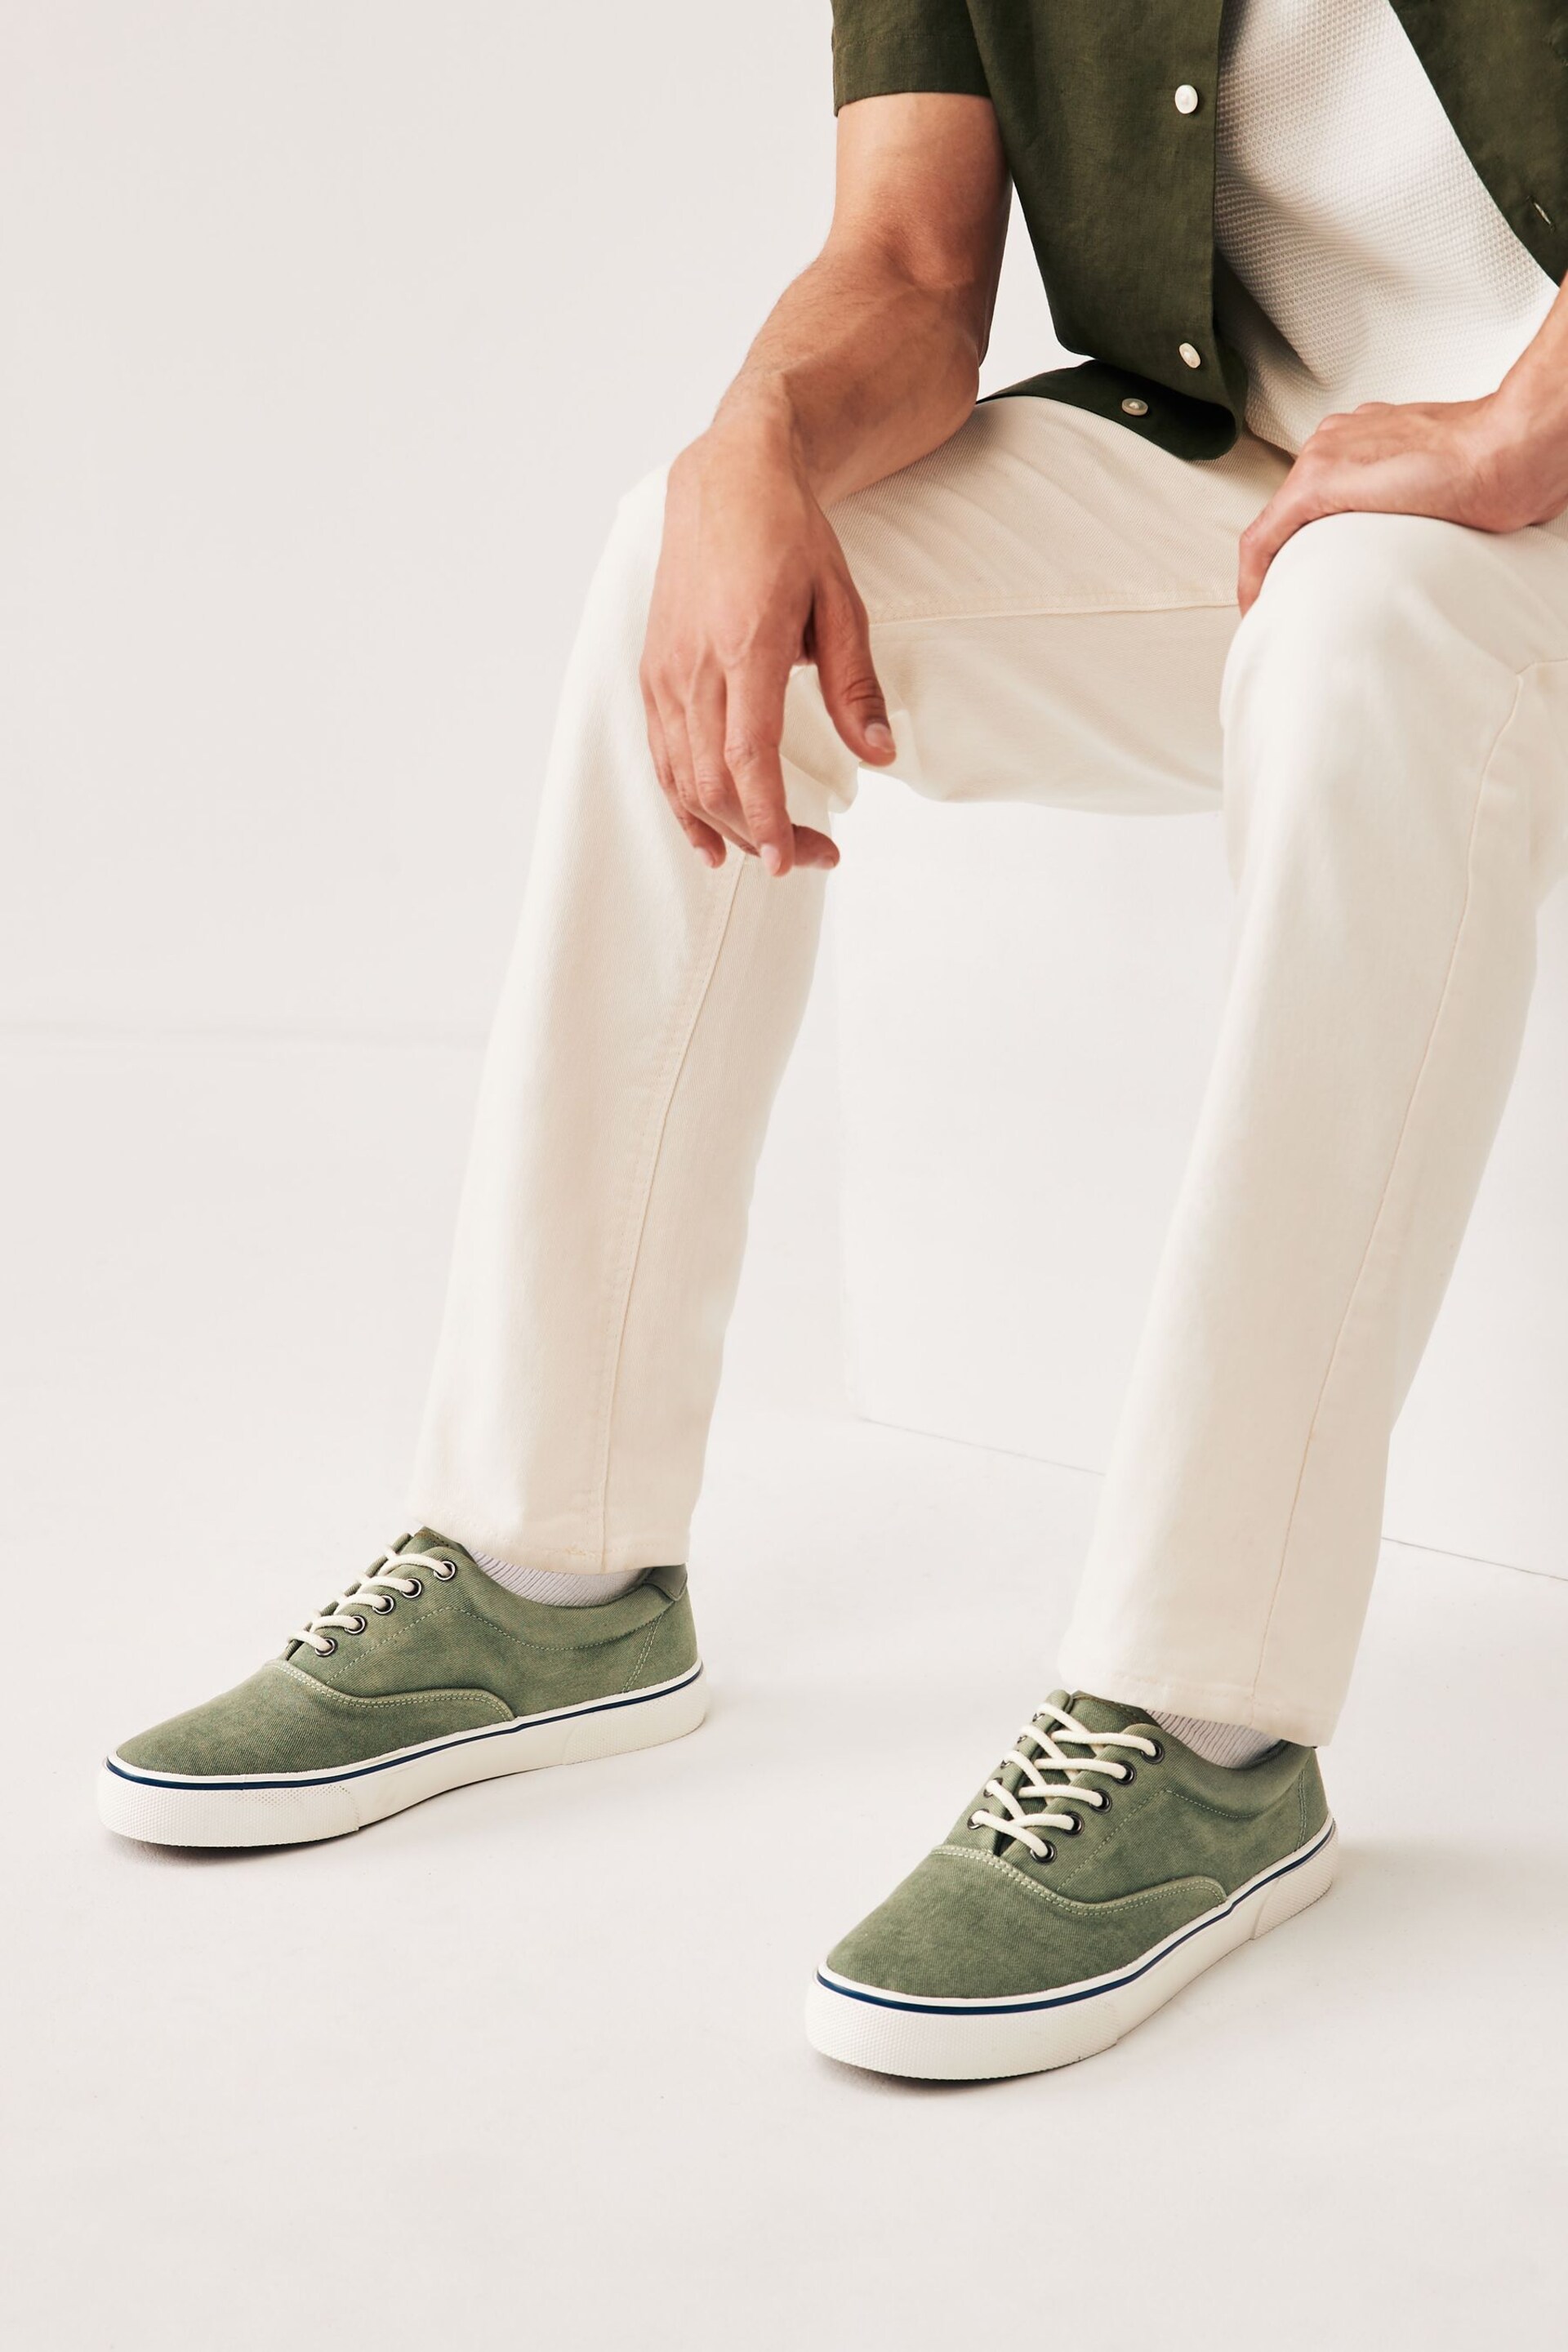 Green Washed Textile Trainers - Image 1 of 6